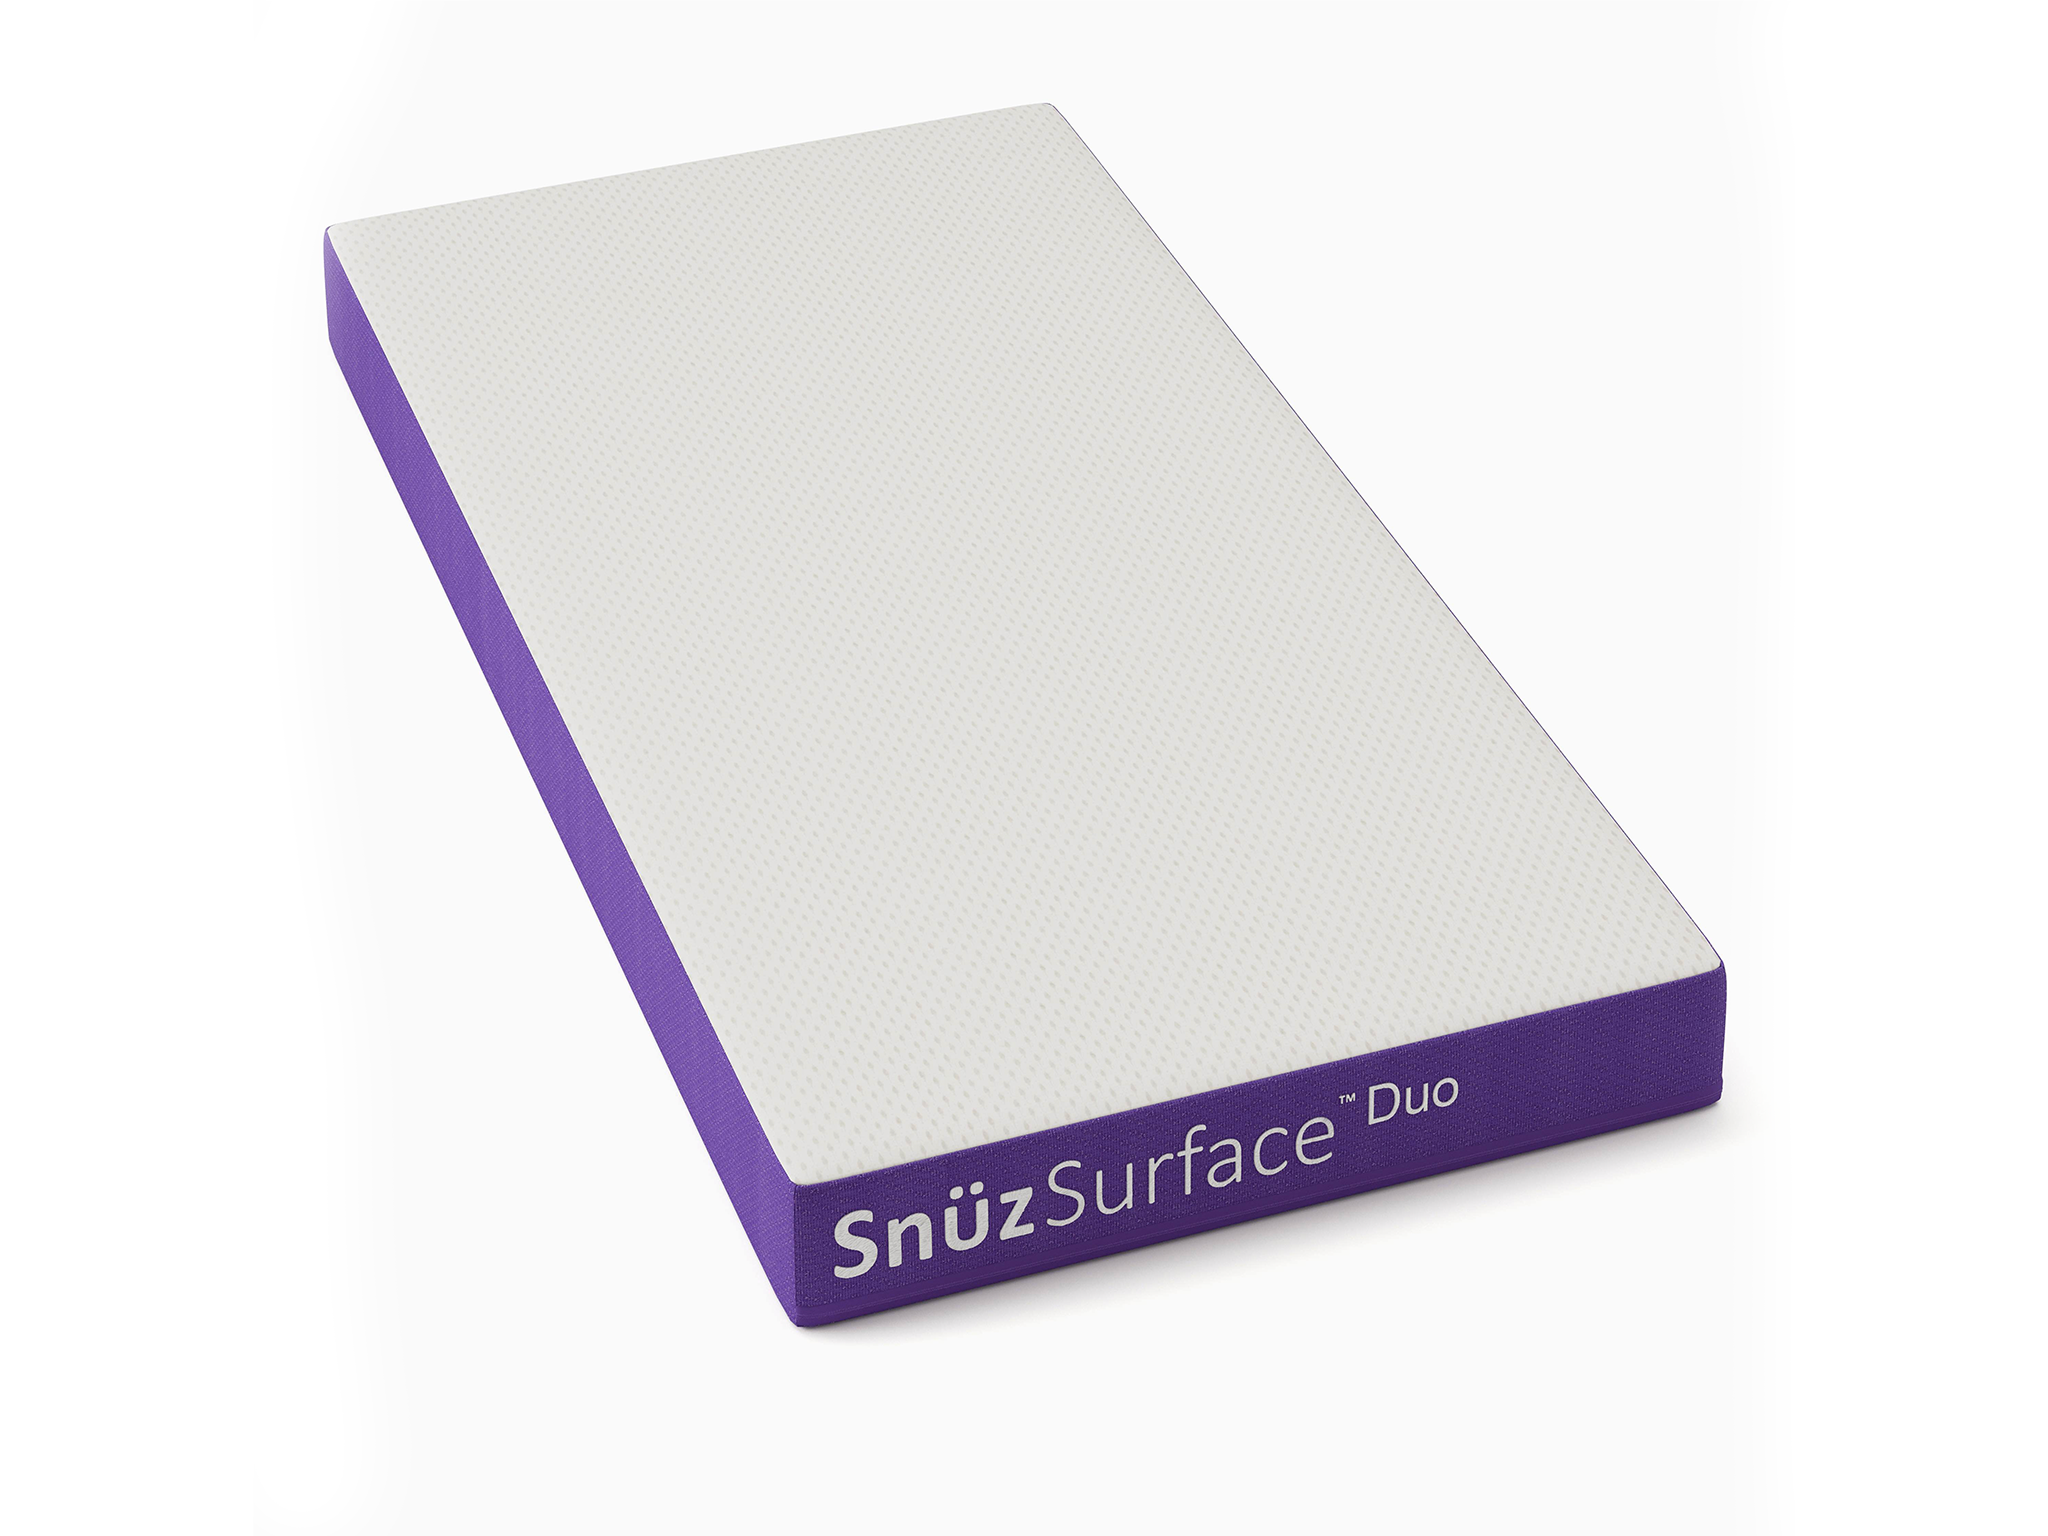 Snüz surface duo dual sided cot bed mattress